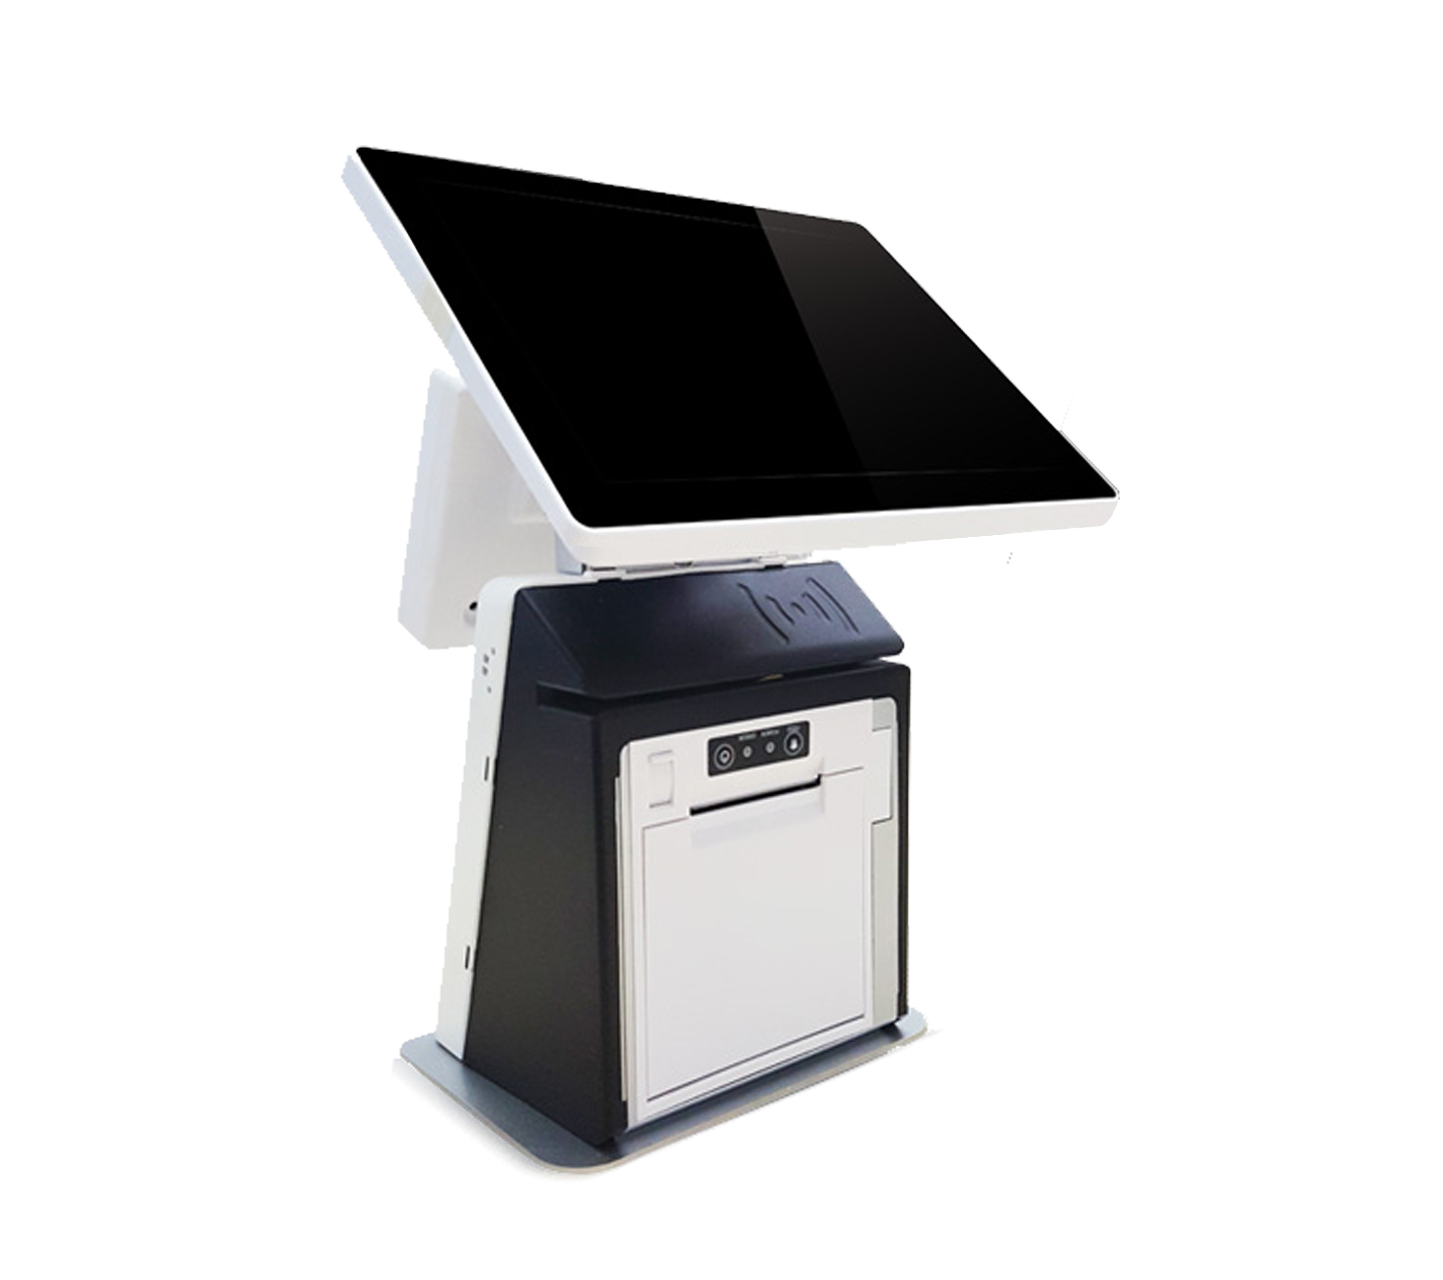 11.6inch J1900 touch screen pos machine with printer